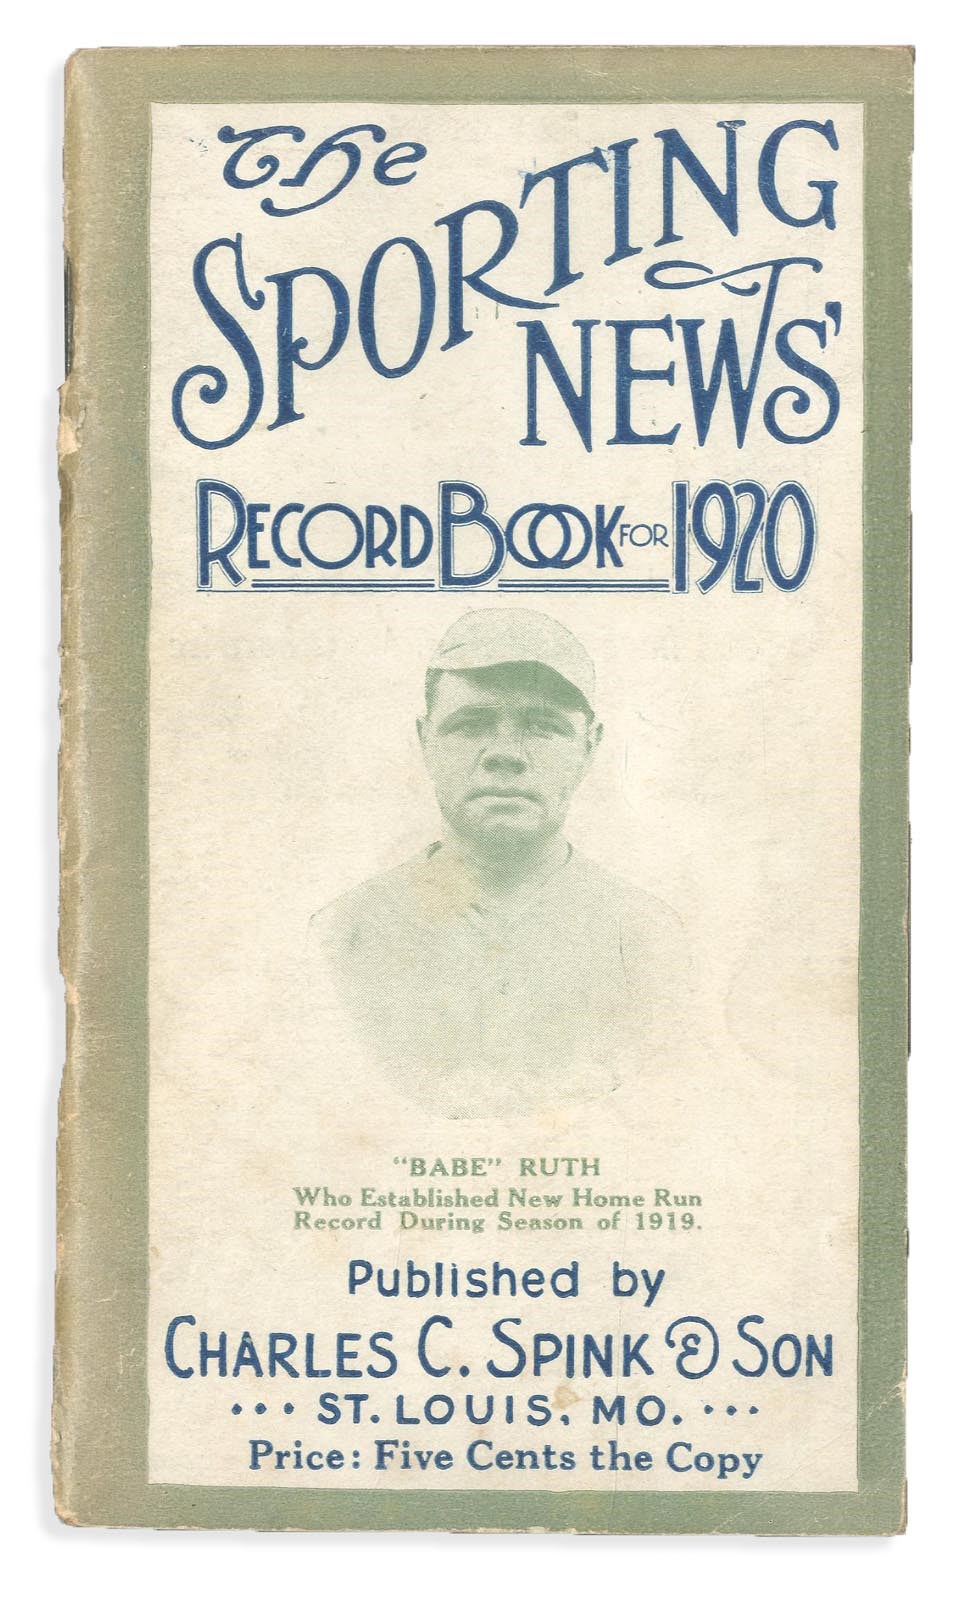 - 1920 Sporting News Record Book with Babe Ruth Cover